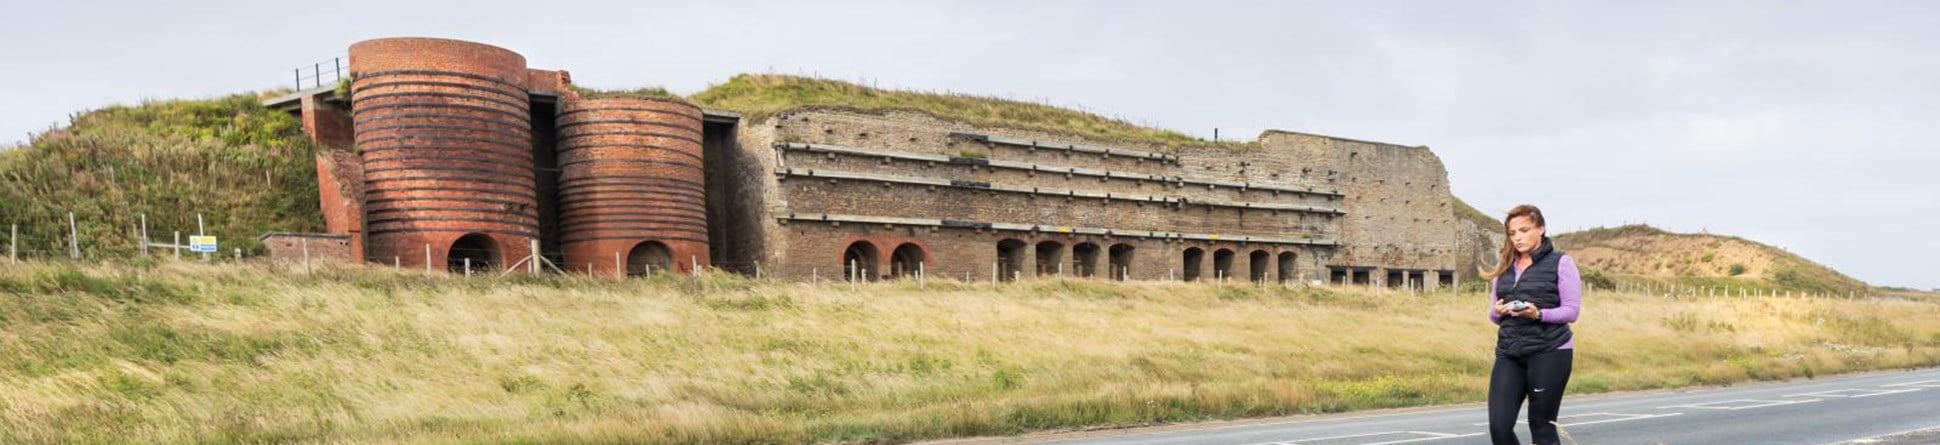 Stone- and brick-built battery structure with horizontal reinforcing timbers with a series of ground-level arched openings to the lime kilns it houses. Dune grass grows in front of it and grassy banks protrude above and either side of the structure.